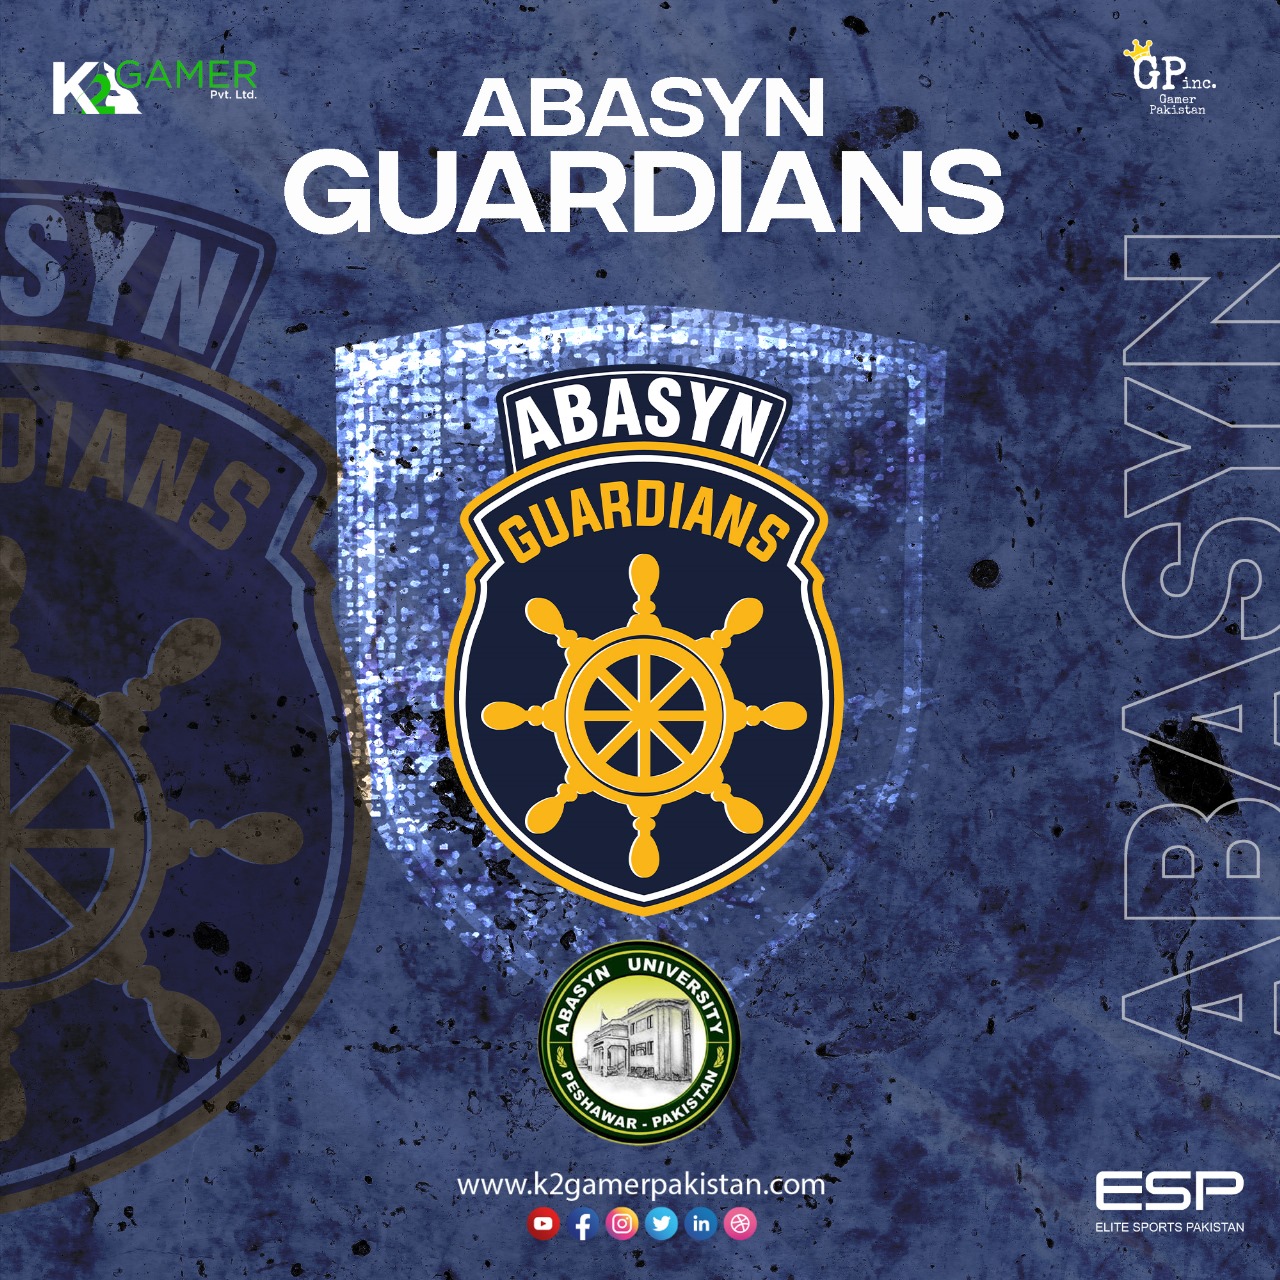 the official logo of ABASYN GUARDIANS